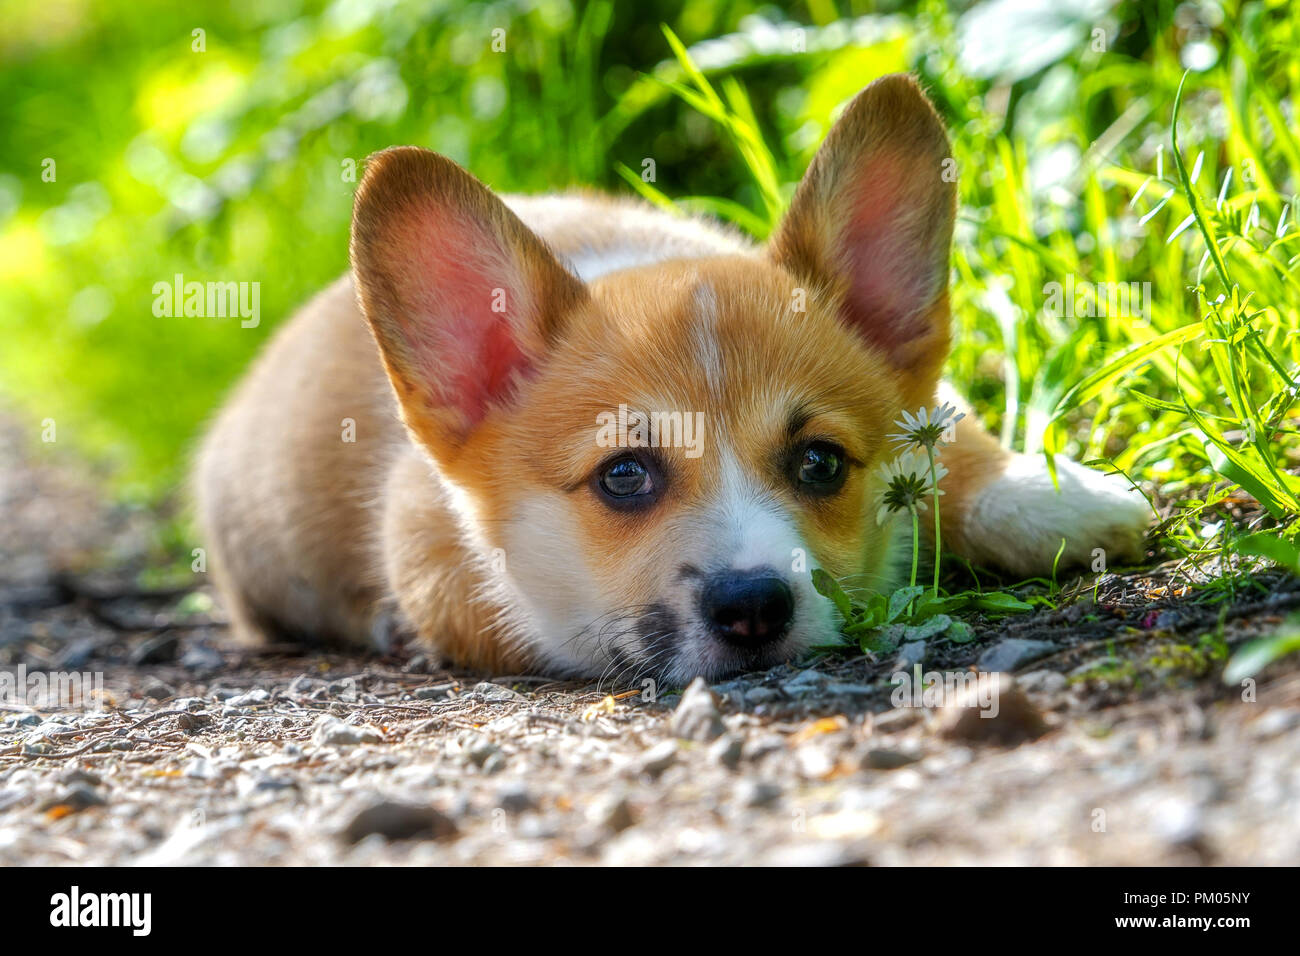 Pembroke Welsh Cogi Puppy With Sable Characteristics Stock Photo